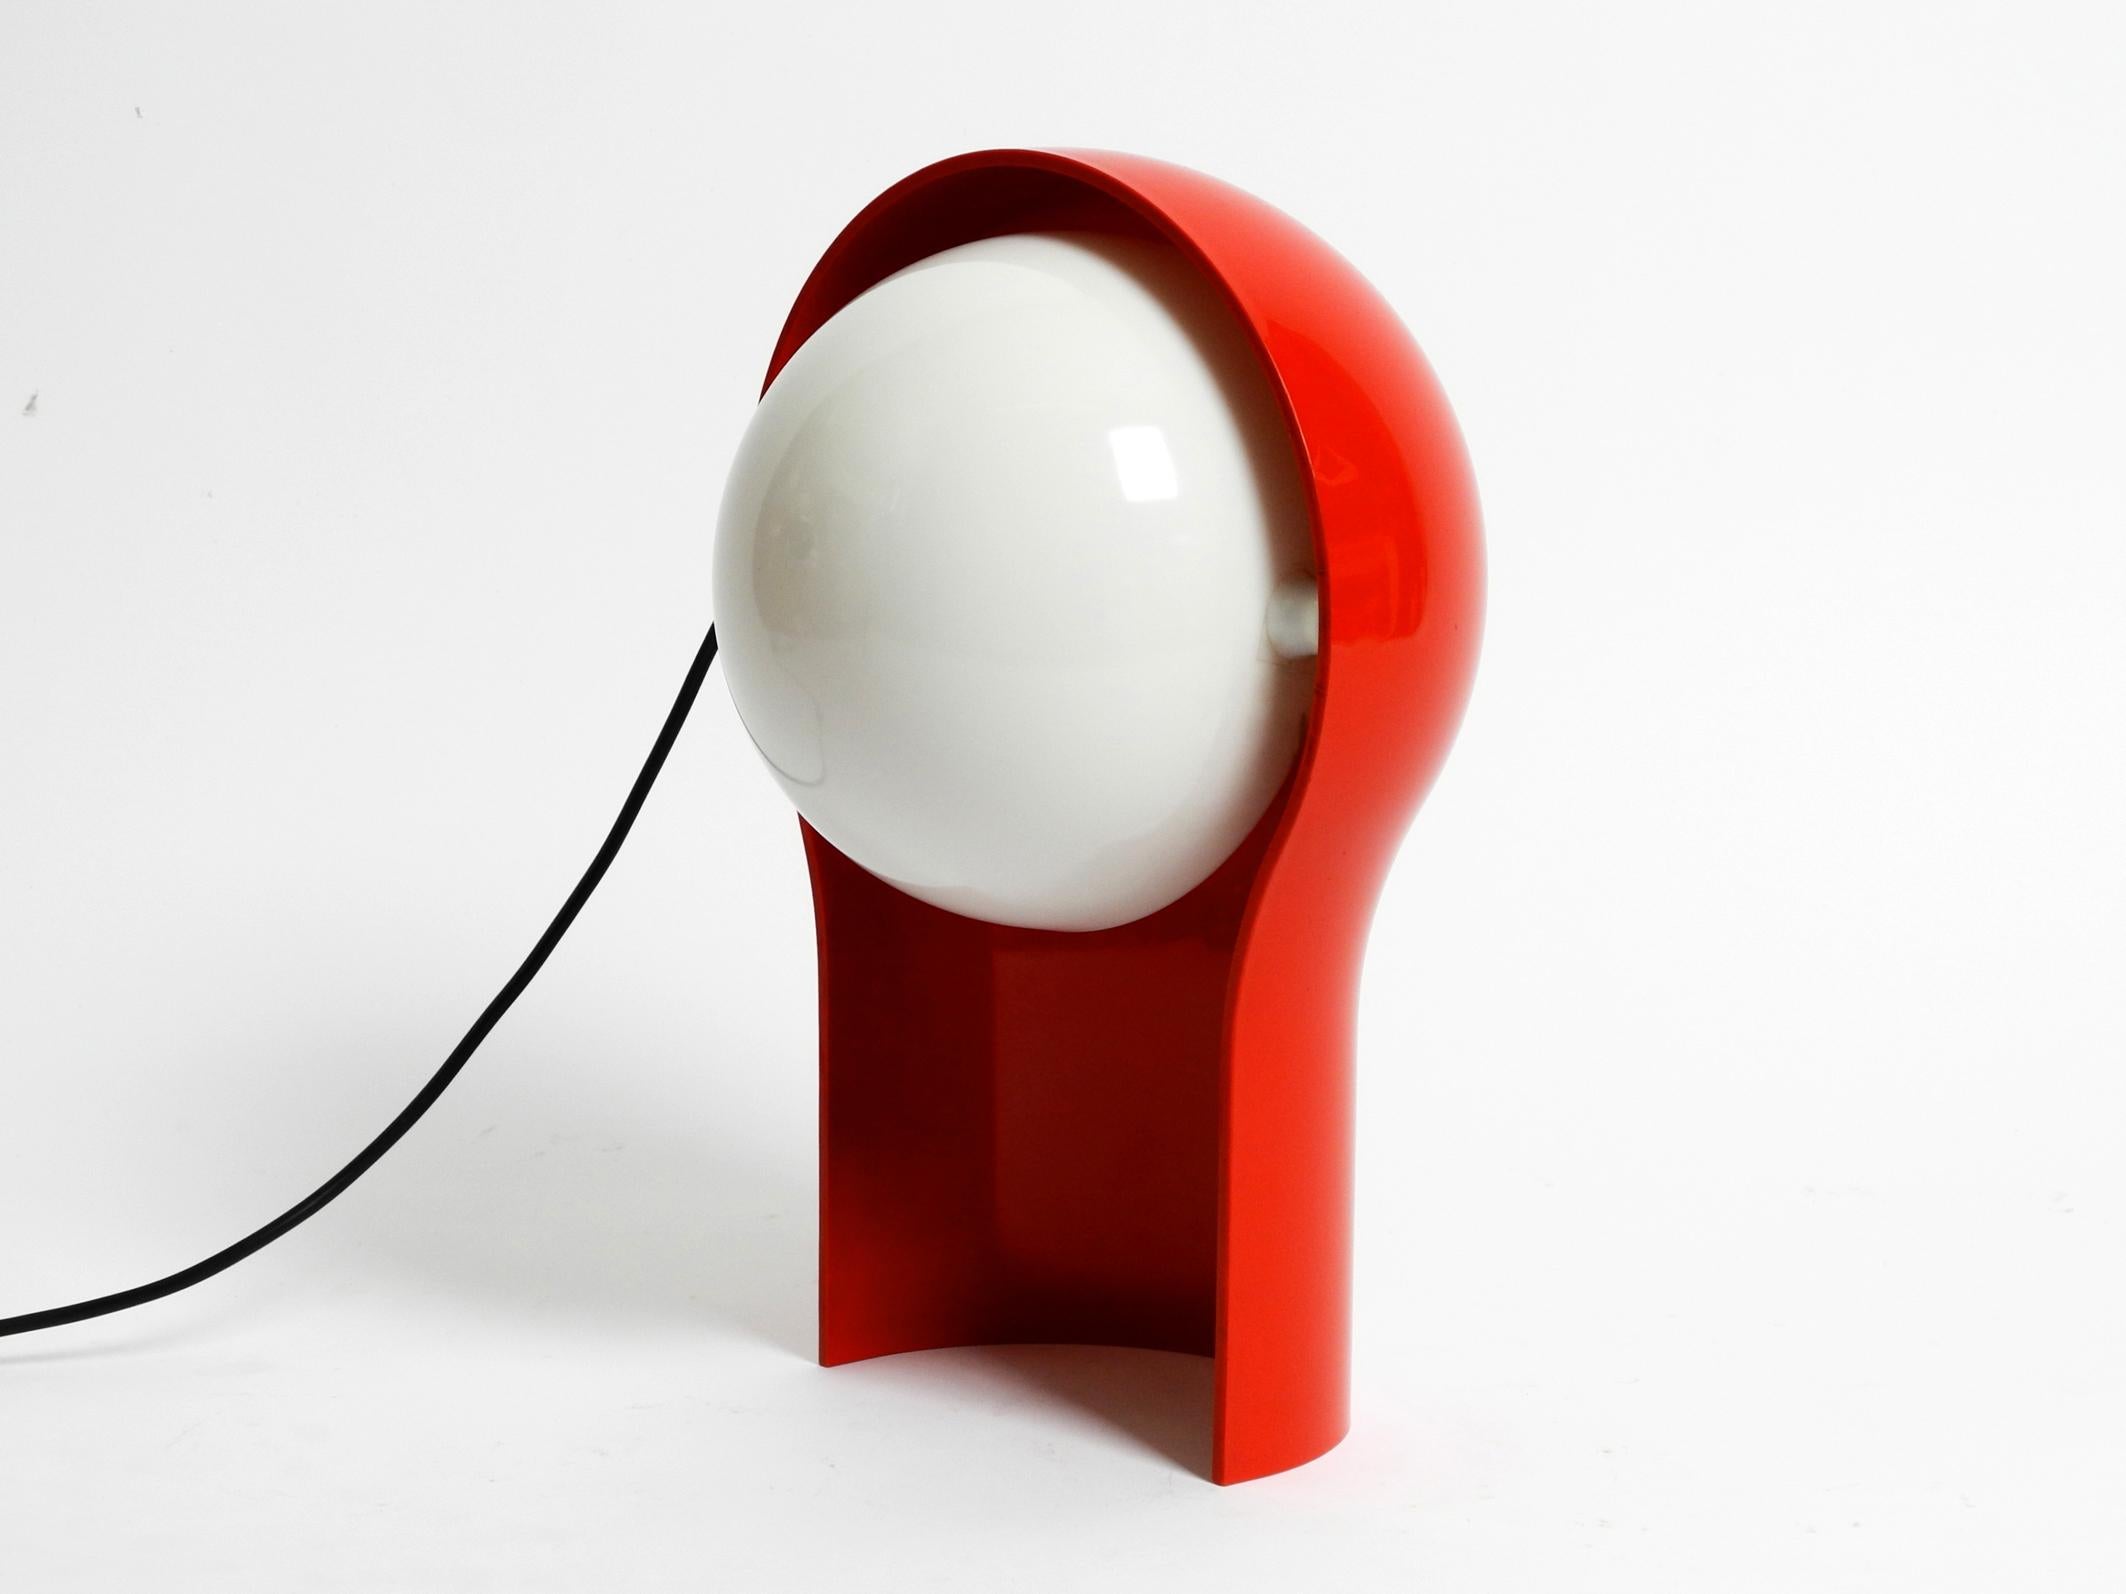 Original Telegono table lamp by Vico Magistretti for Artemide 1968.
In very good, perfect original condition.
The Italian classic with a red frame and the movable shade in creamy white.
The movable shade holds in every position.
All parts in